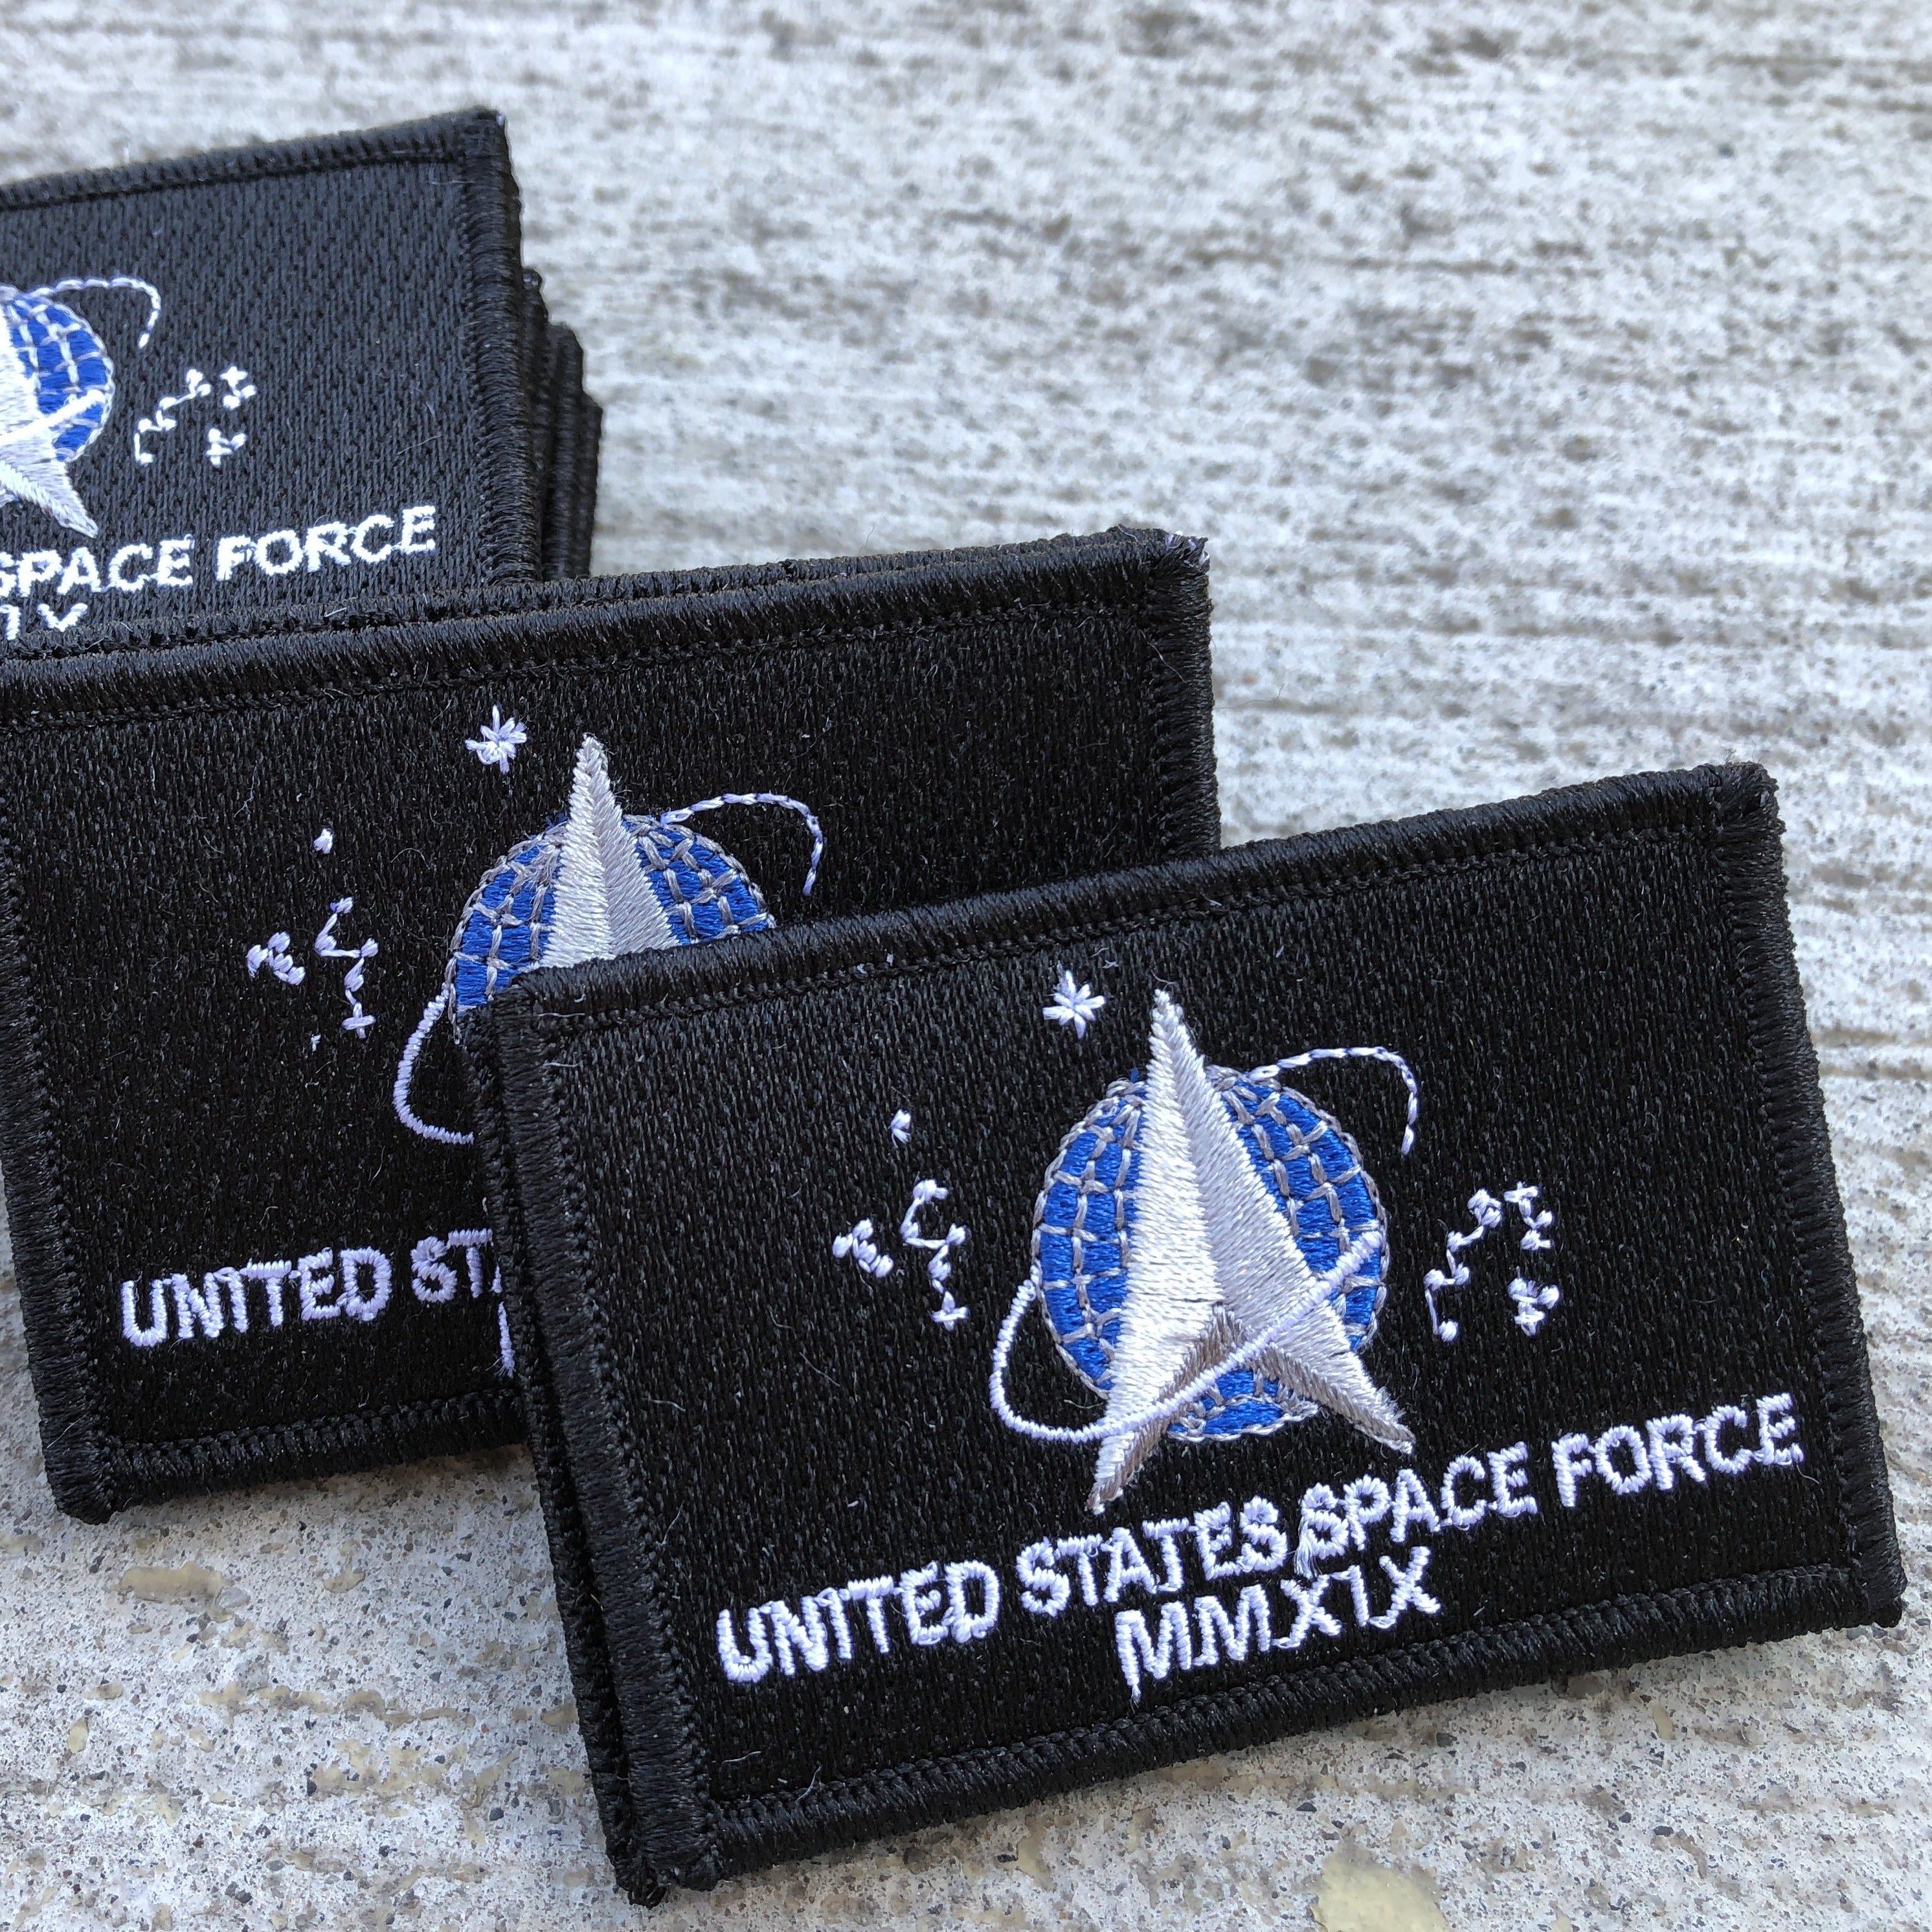 2"x3" US Space Force Tactical Patches